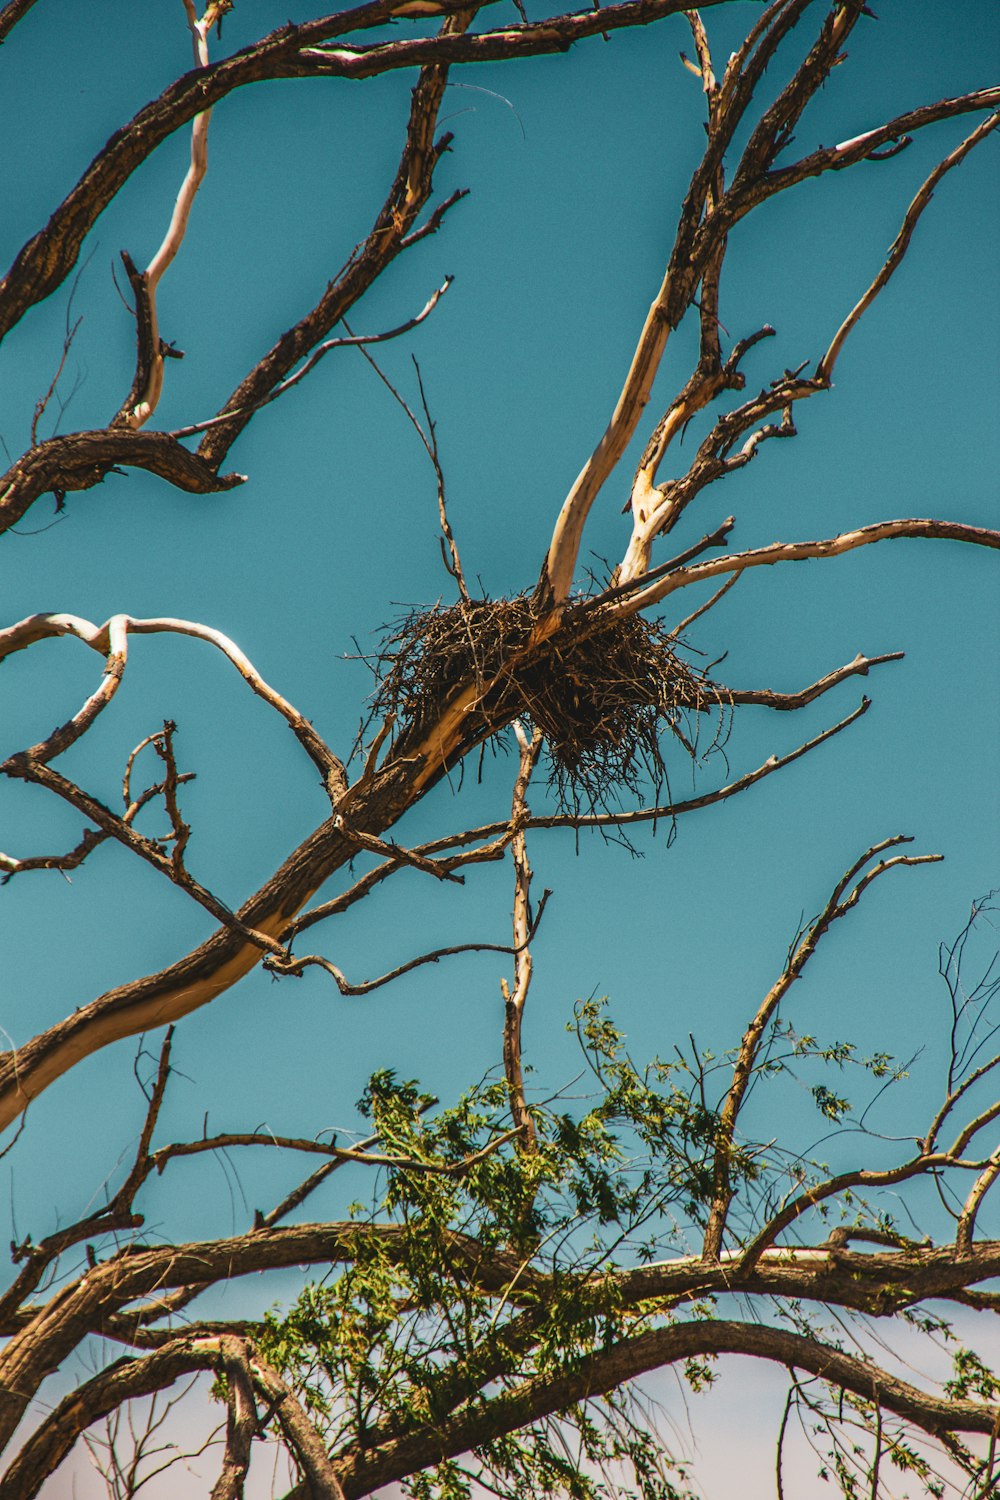 a bird's nest in a bare tree against a blue sky